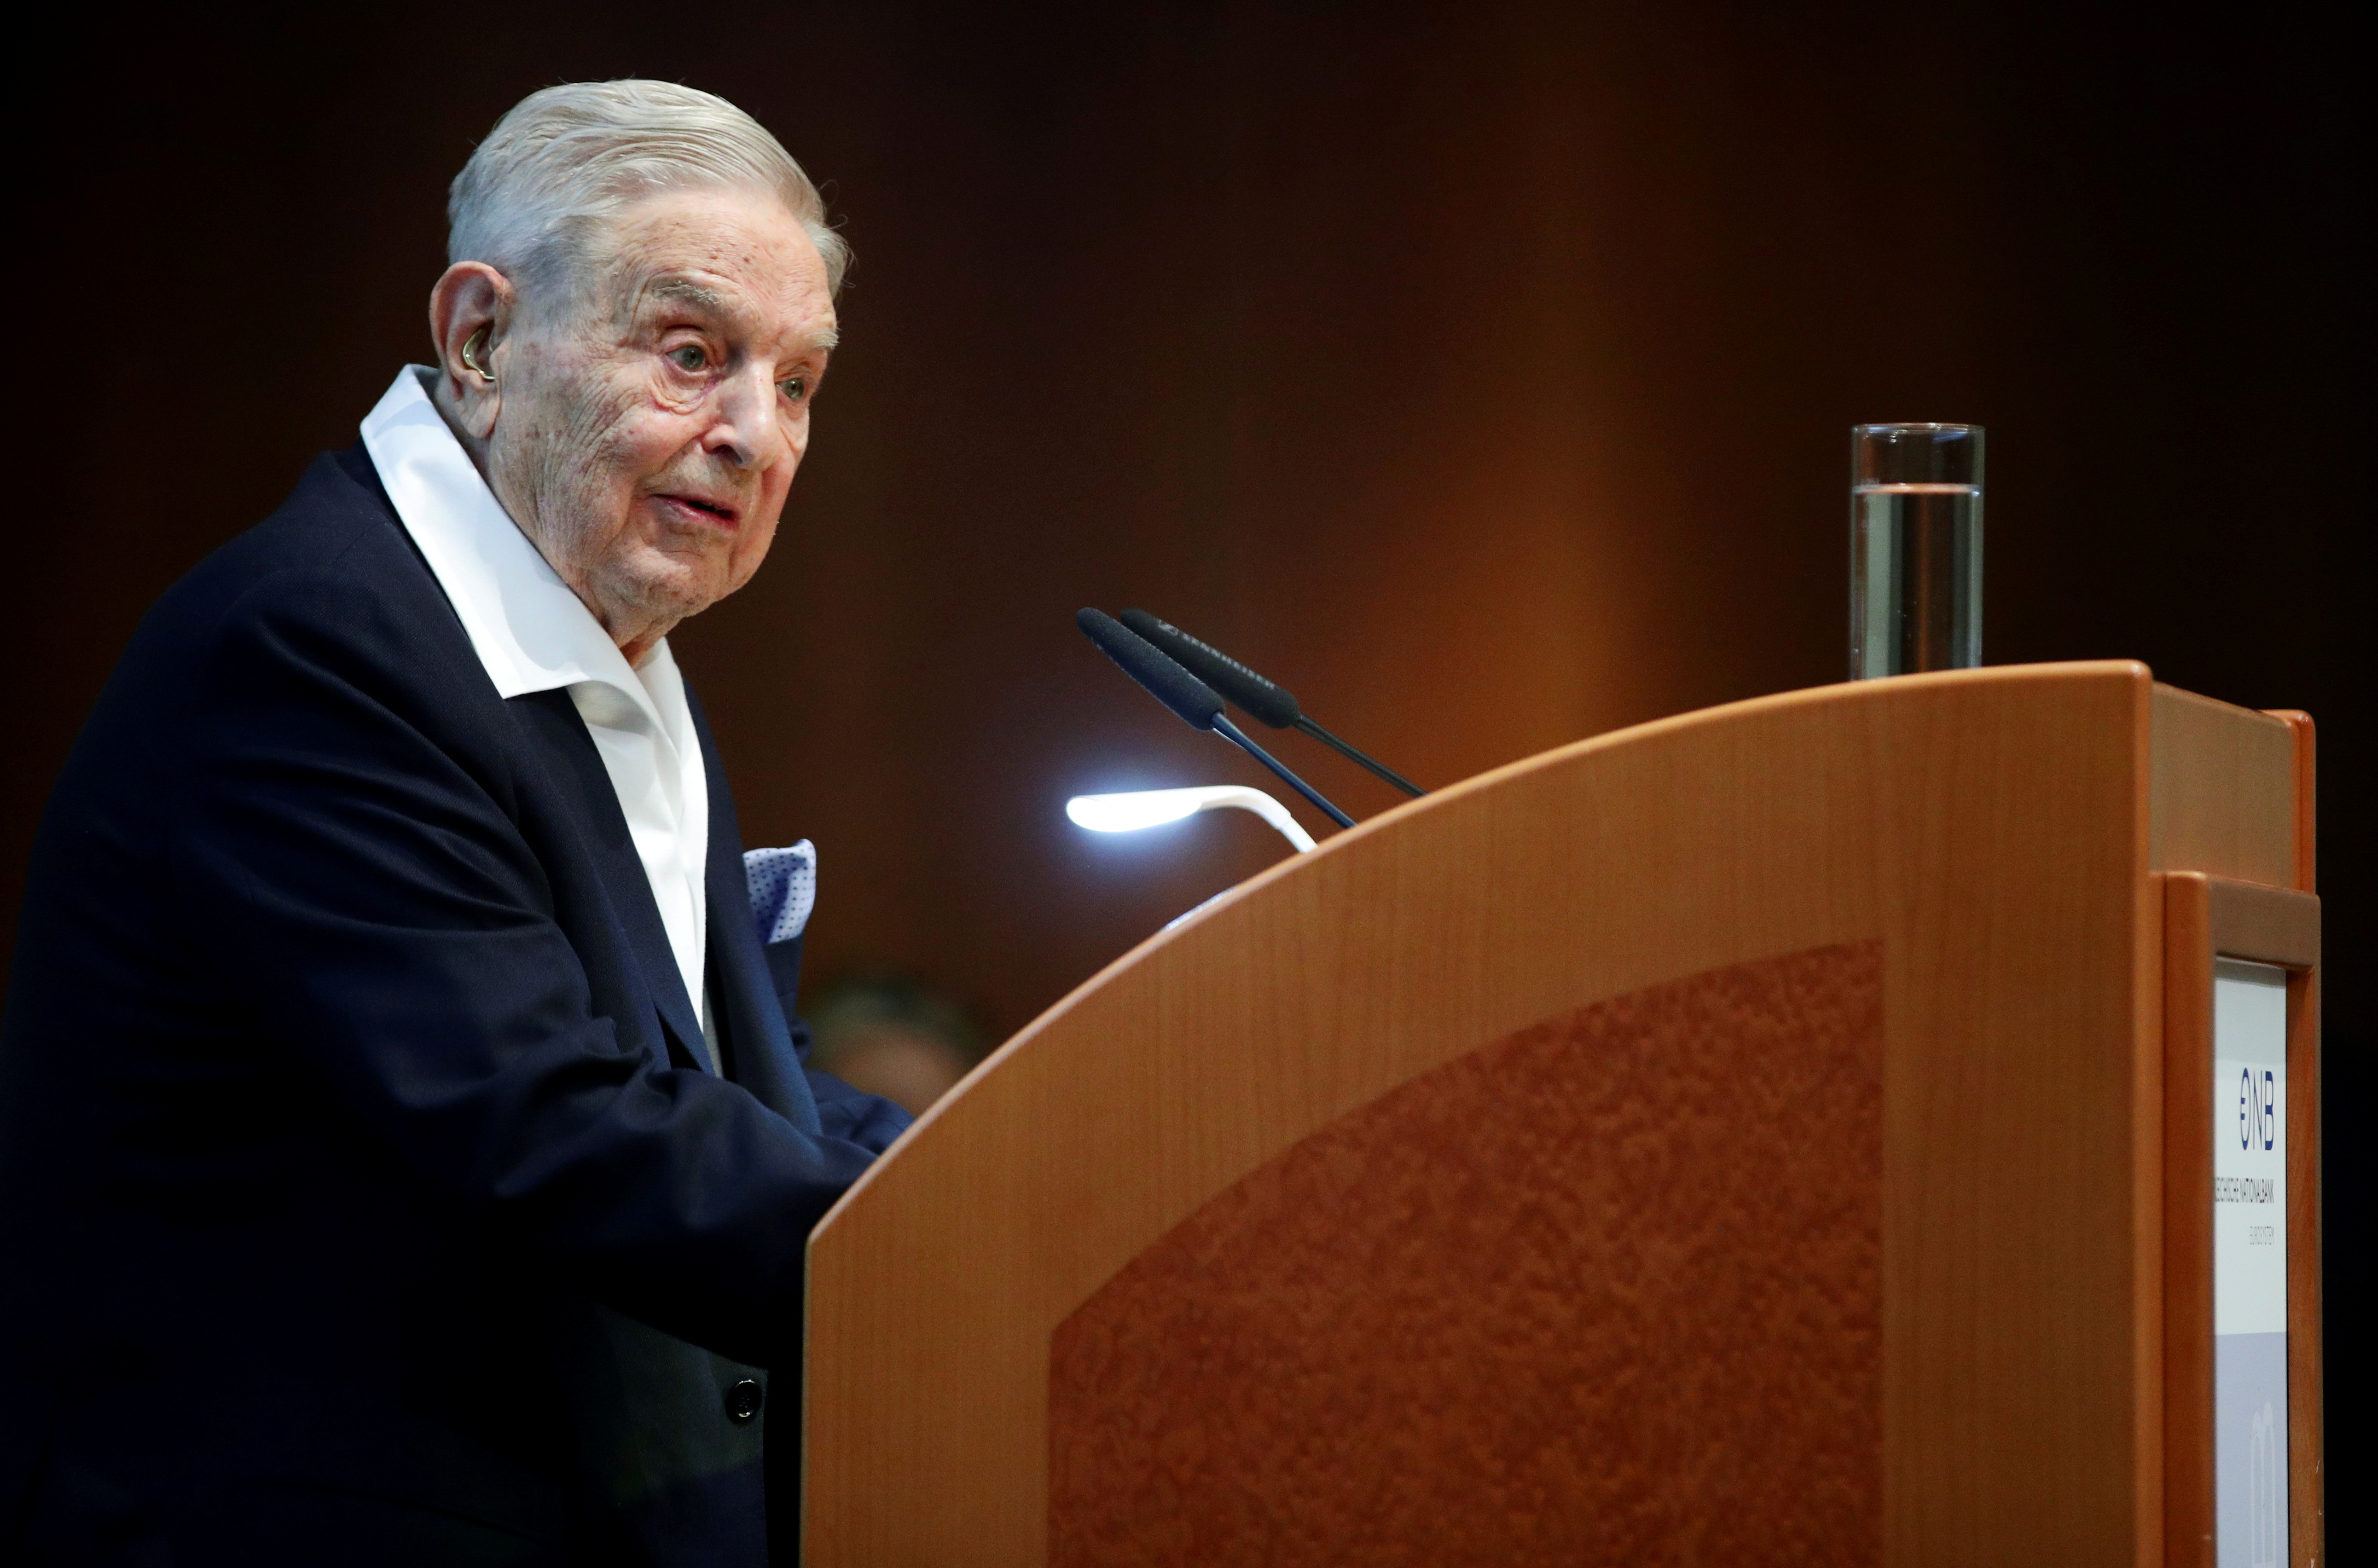 Billionaire investor George Soros speaks to the audience at the Schumpeter Award in Vienna, Austria June 21, 2019. REUTERS/Lisi Niesner/File Photo